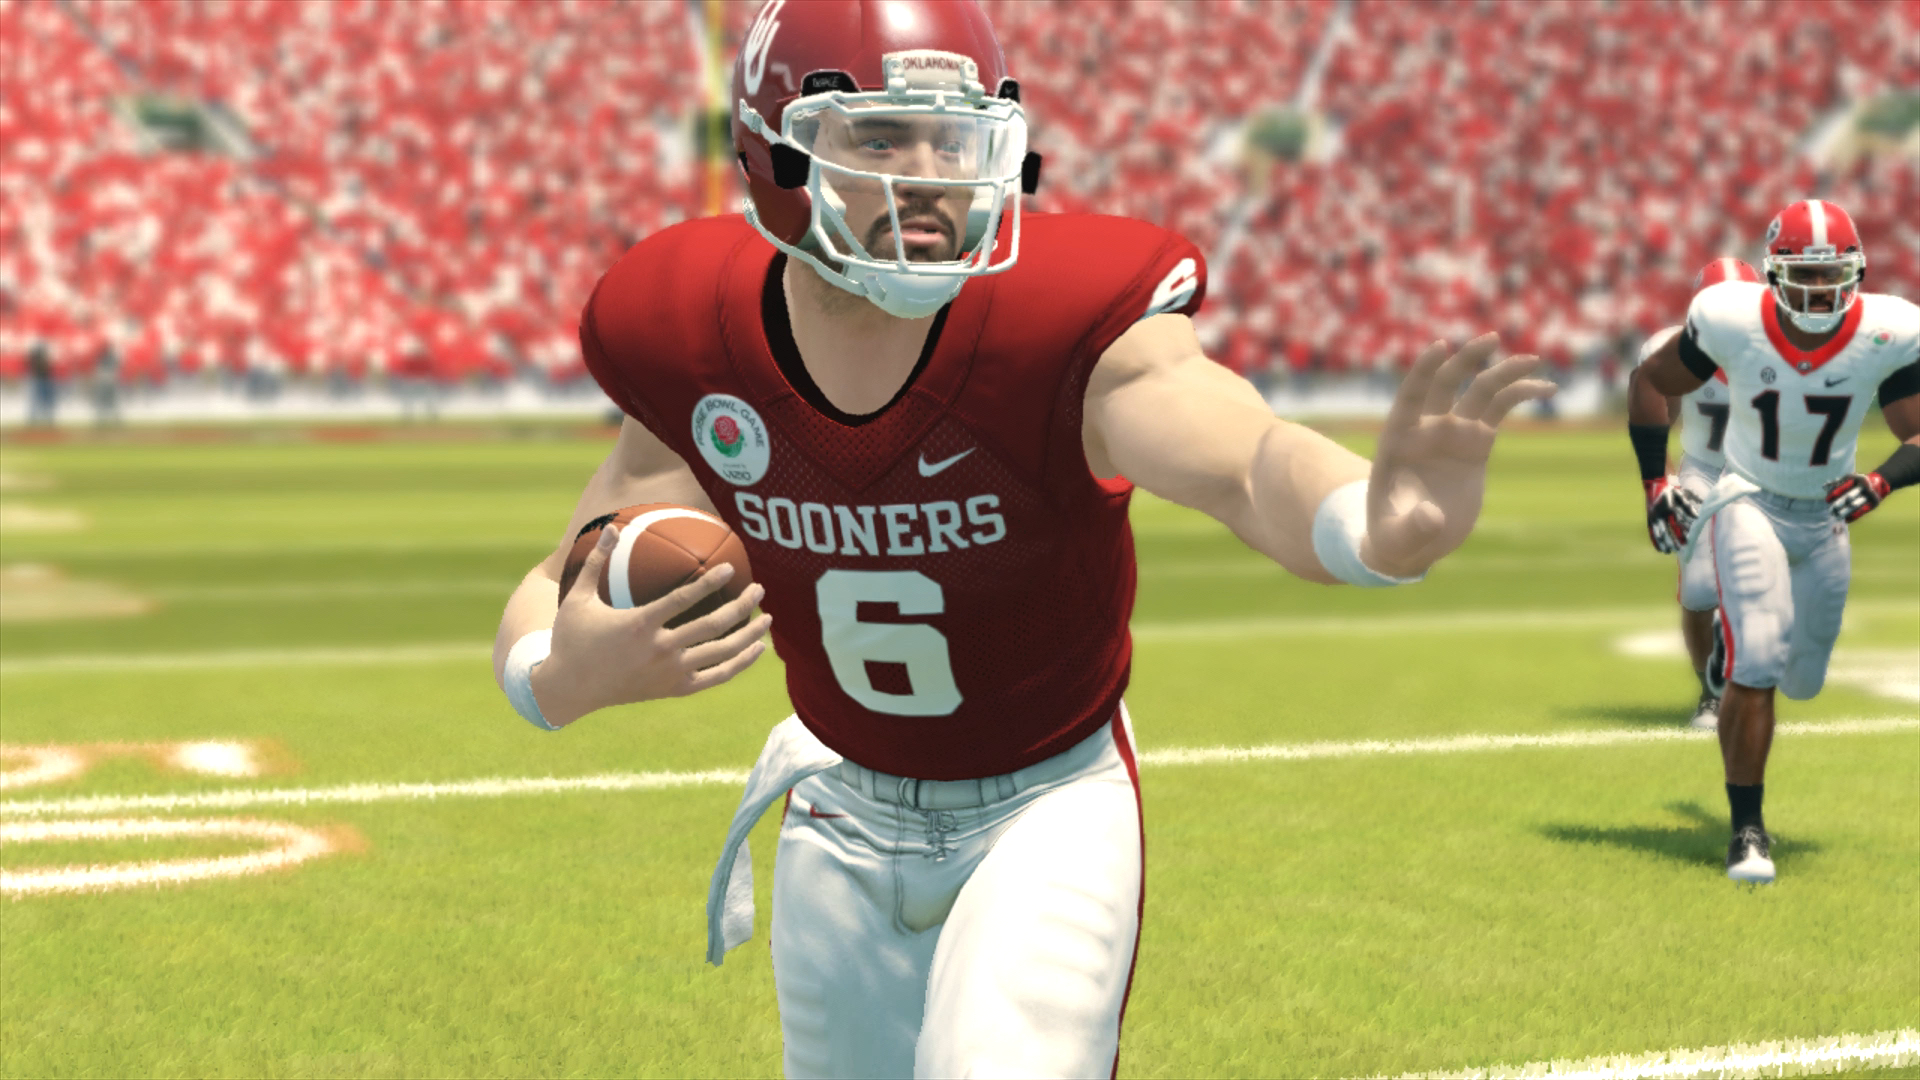 New College Football Video Game Gridiron Champions